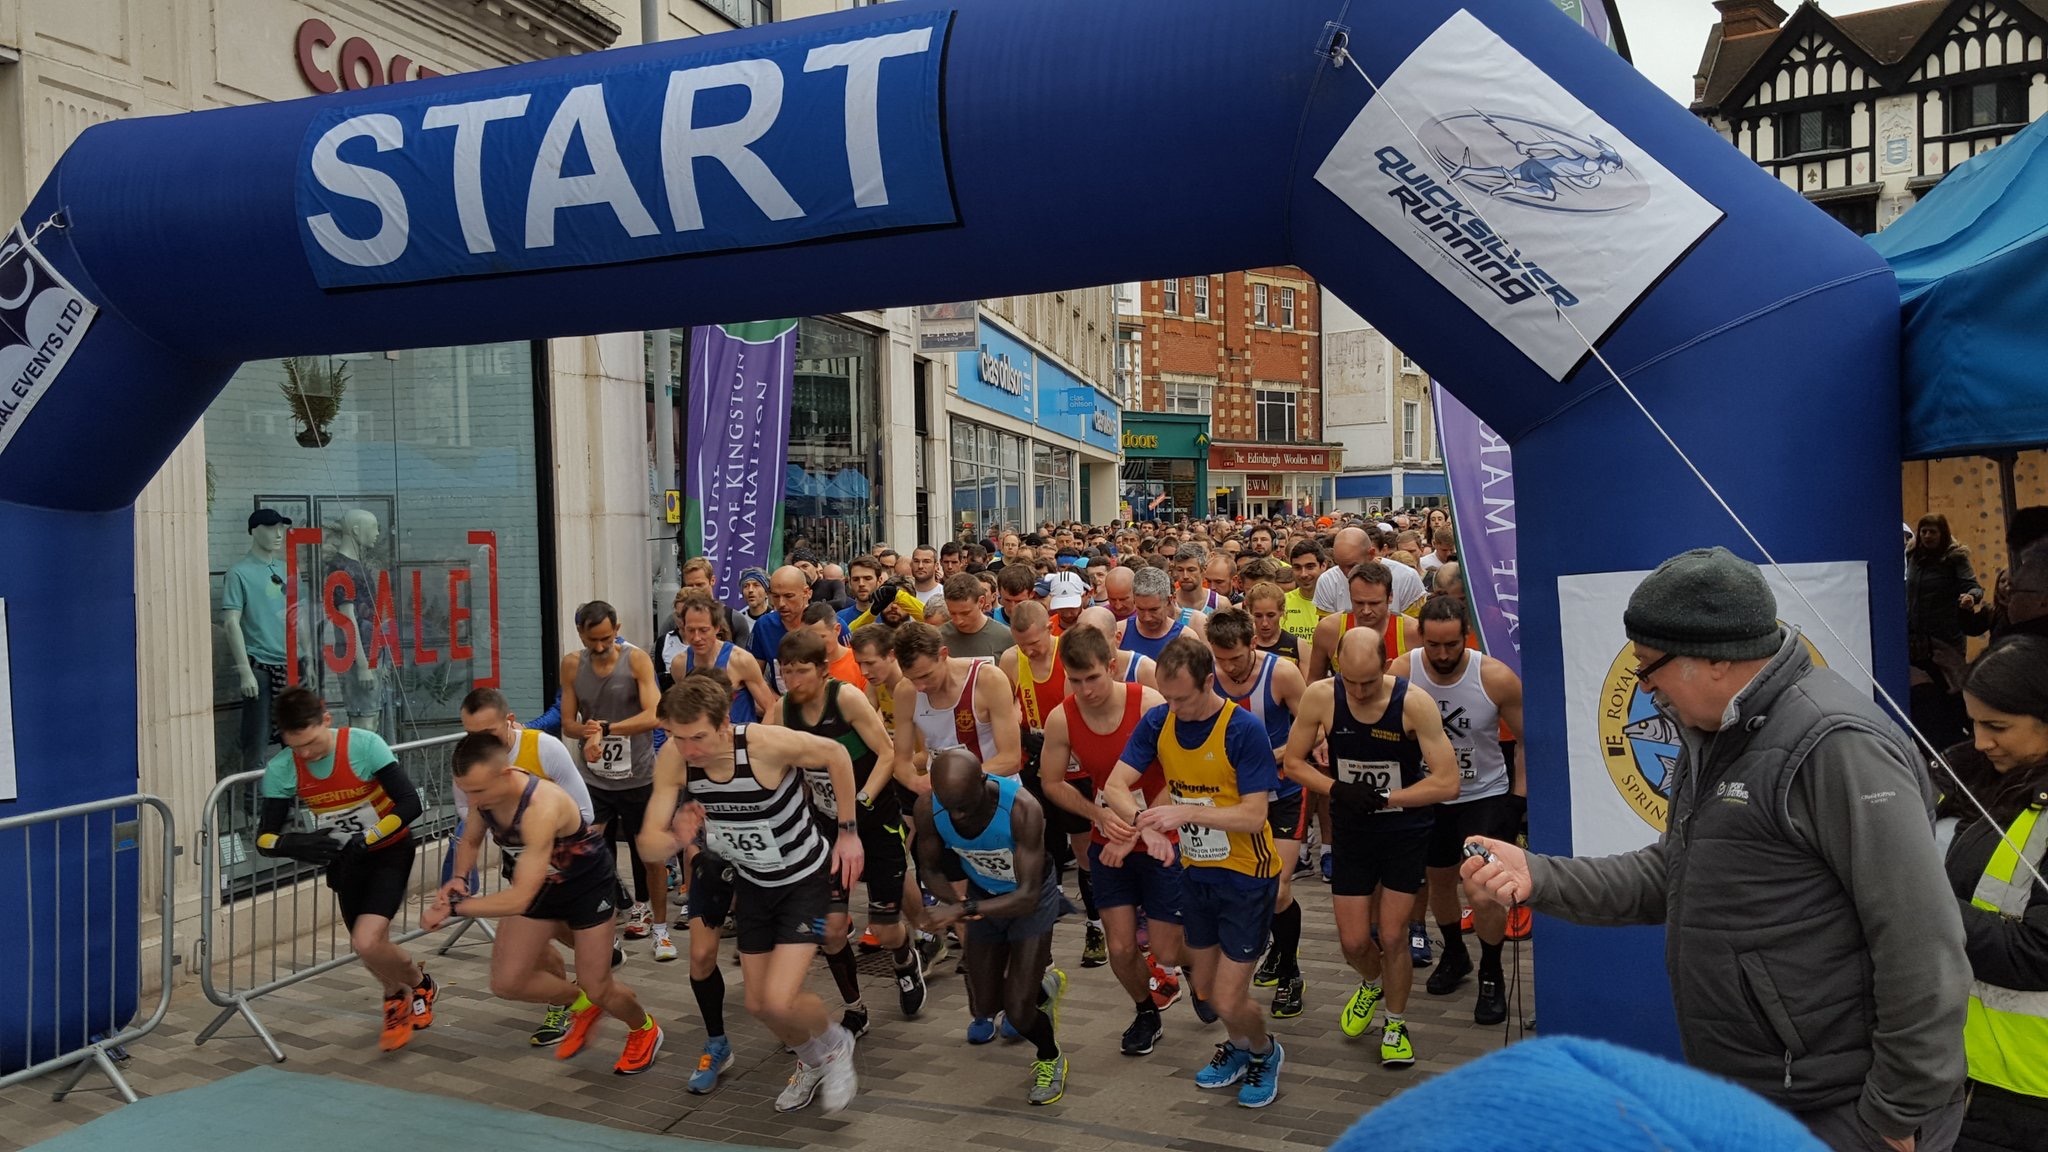 South-west Londoners run for the spring half marathon in Kingston